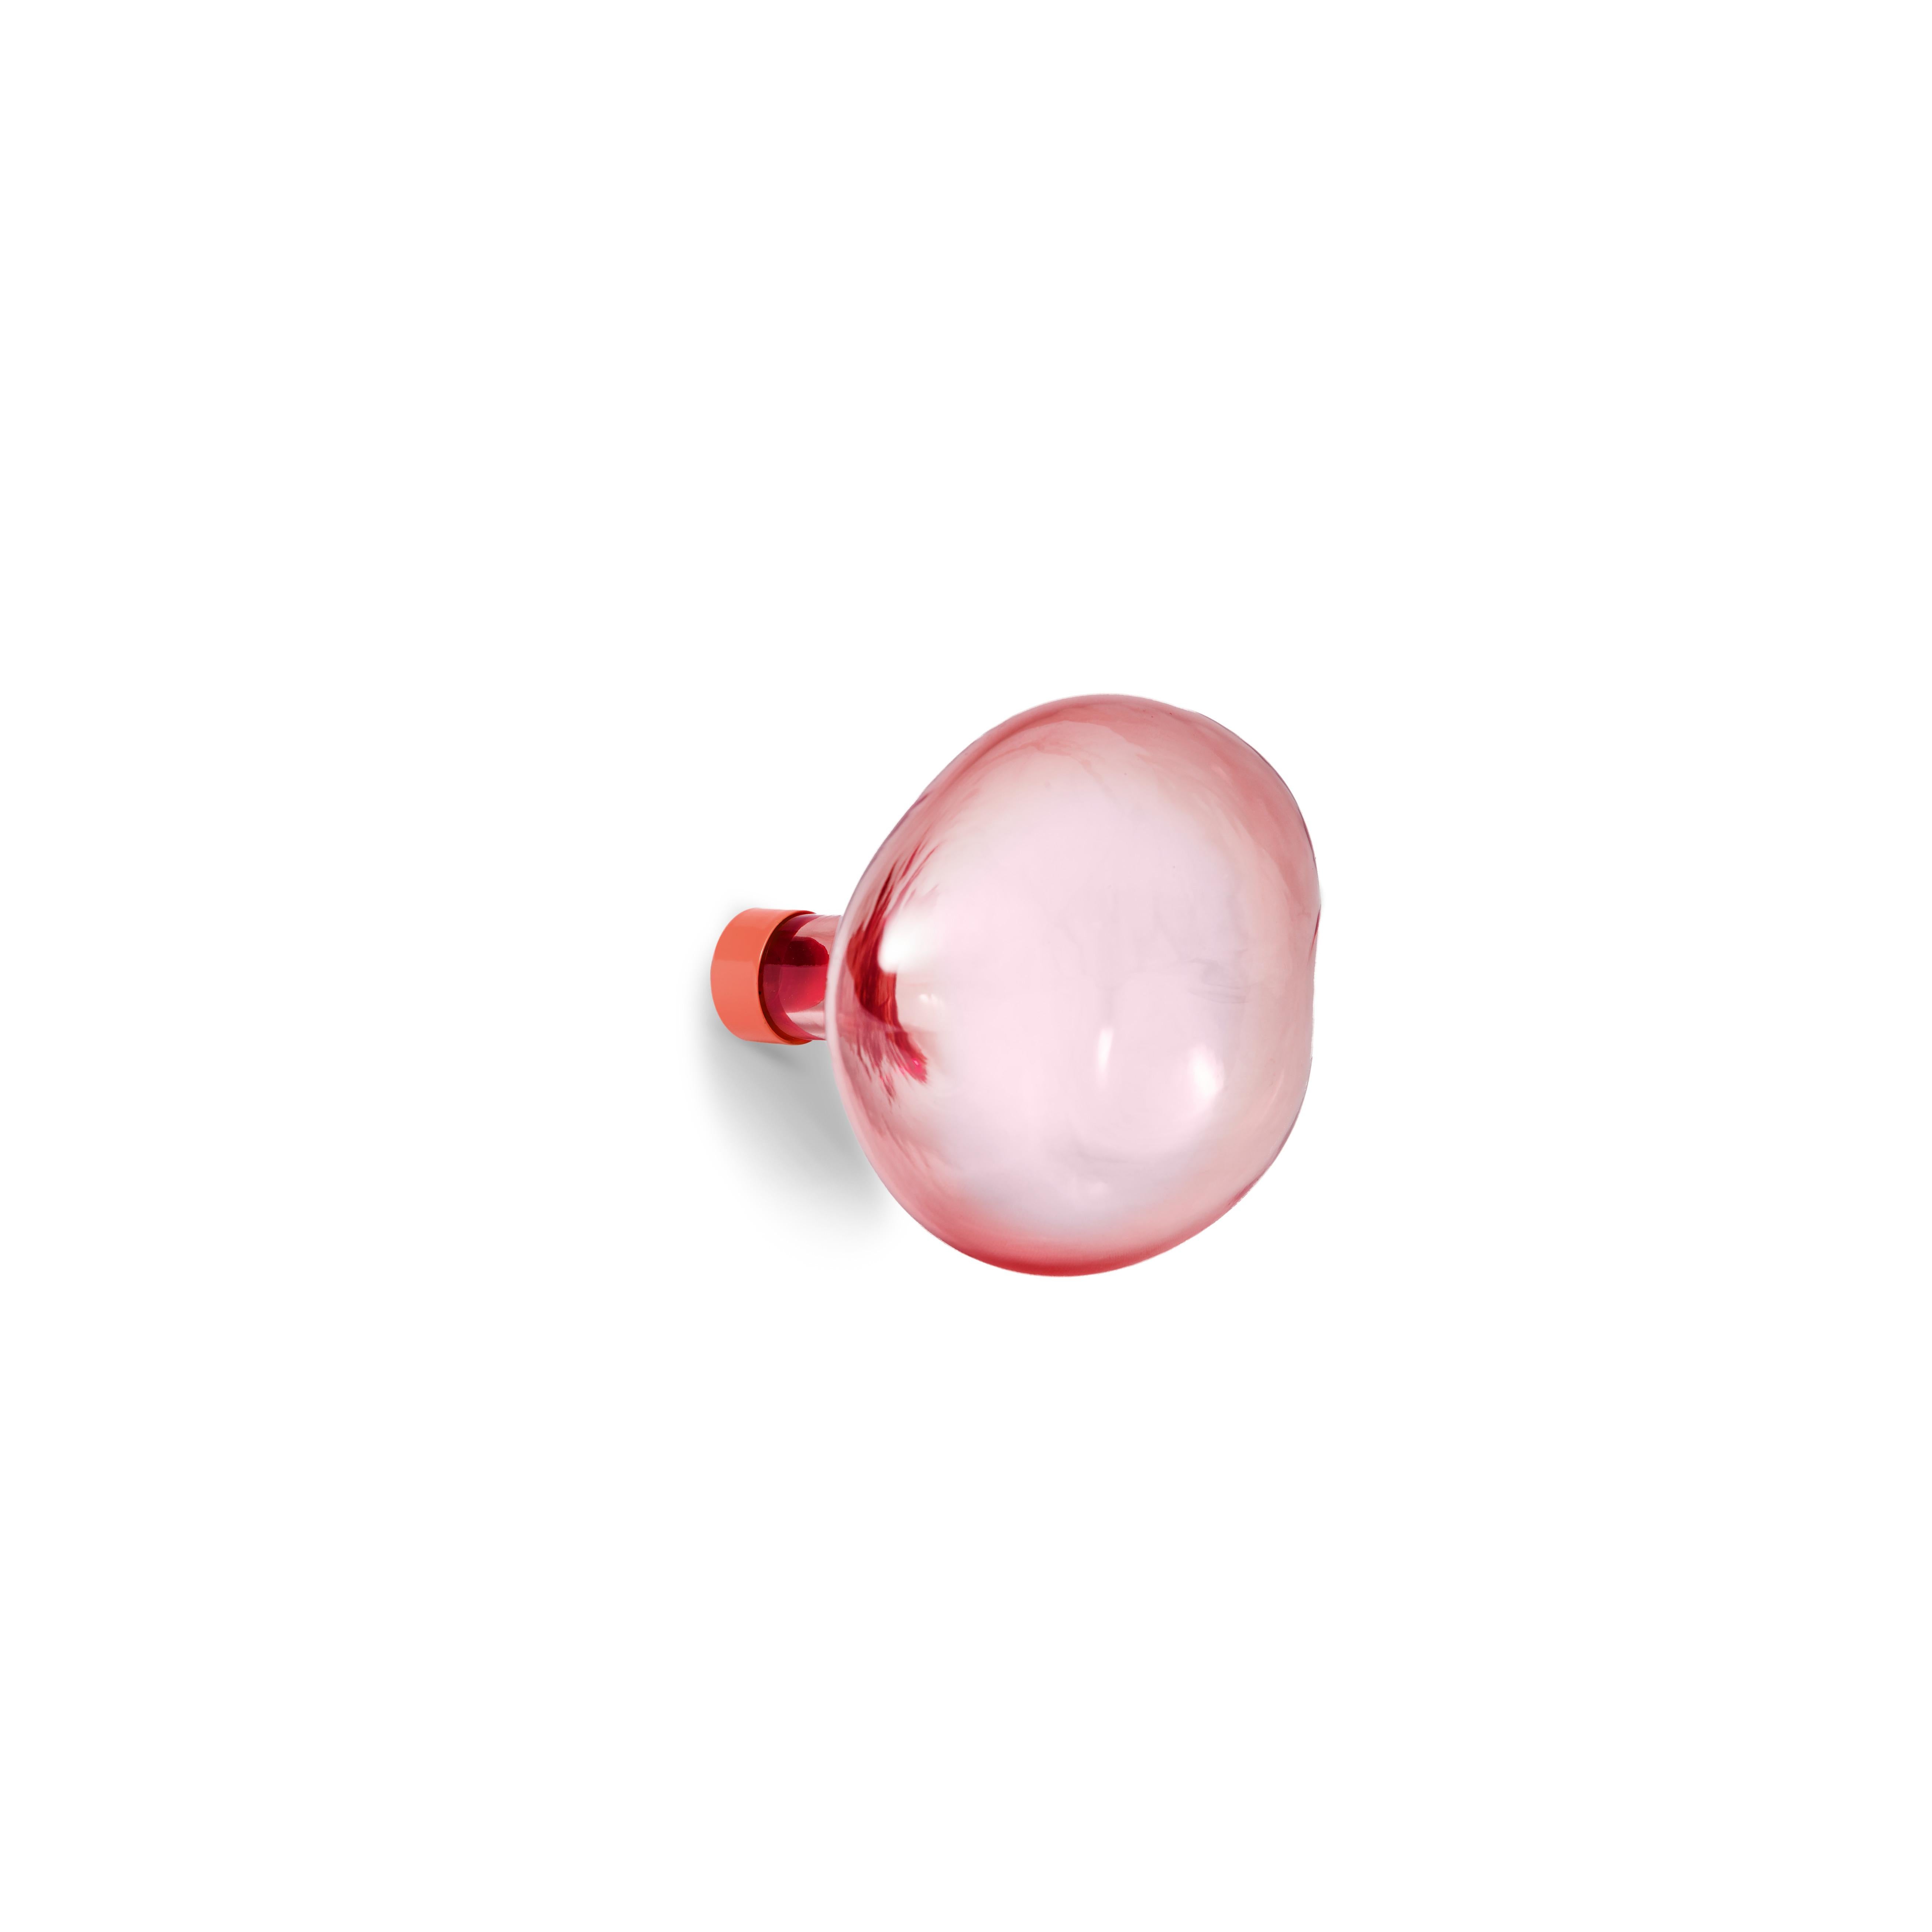 Petite Friture Large Bubble Coat Hanger in Transparent Coral Glass by Vaulot & Dyèvre, 2014

Hand blown in a mould, the bubble coat cook come in two sizes and set up in the same manner as soap bubbles, in unpredictable forms. The result